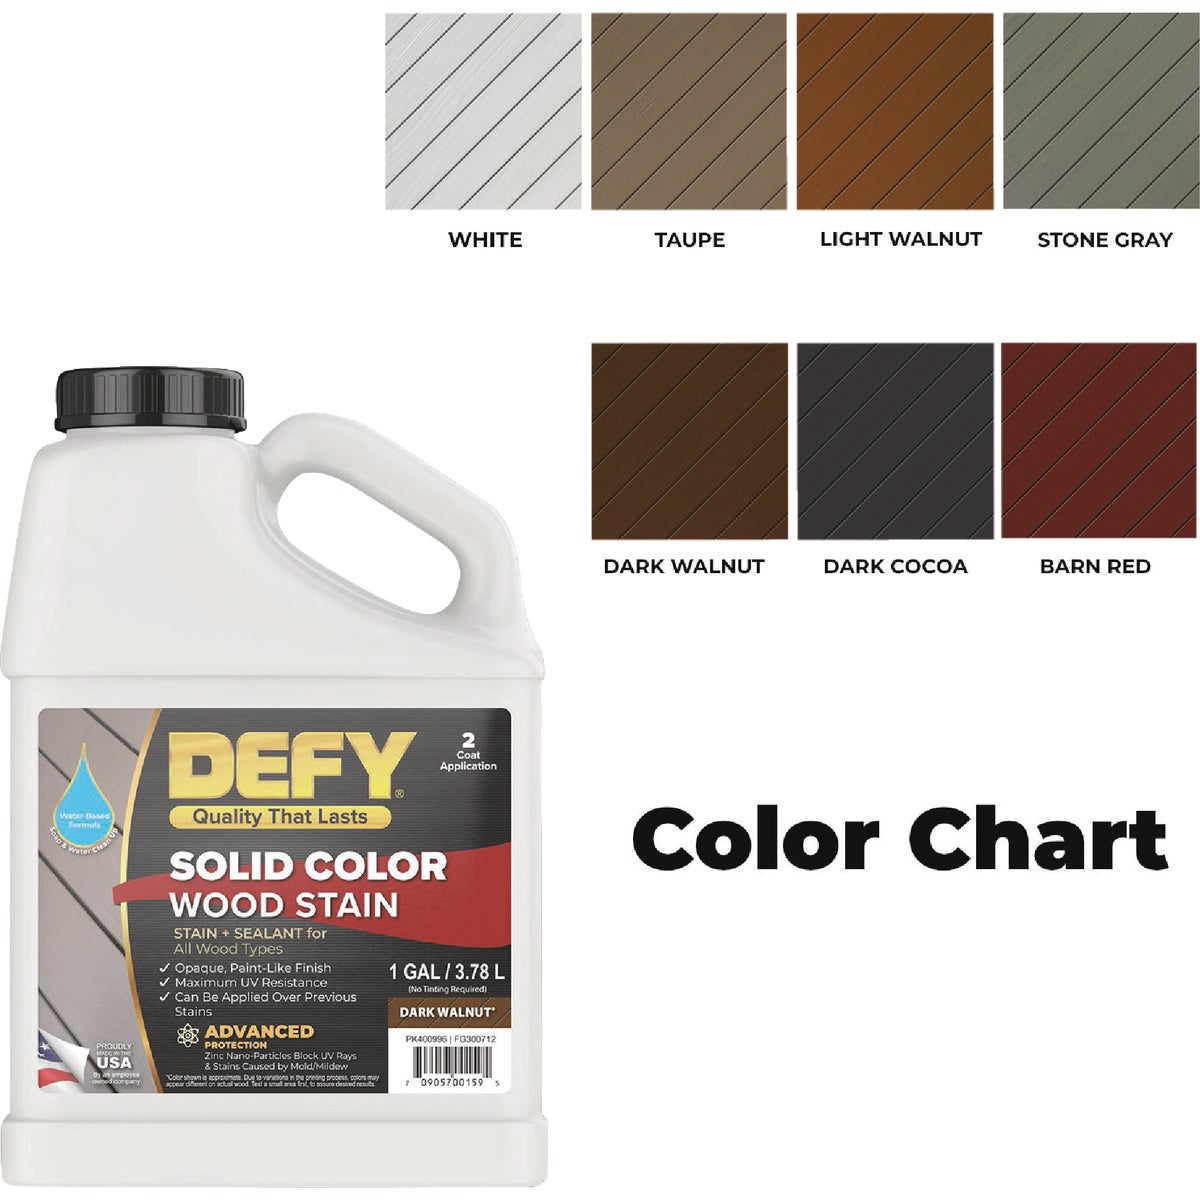 Defy Solid Color Wood Stain, Stone Gray, 1 Gal.